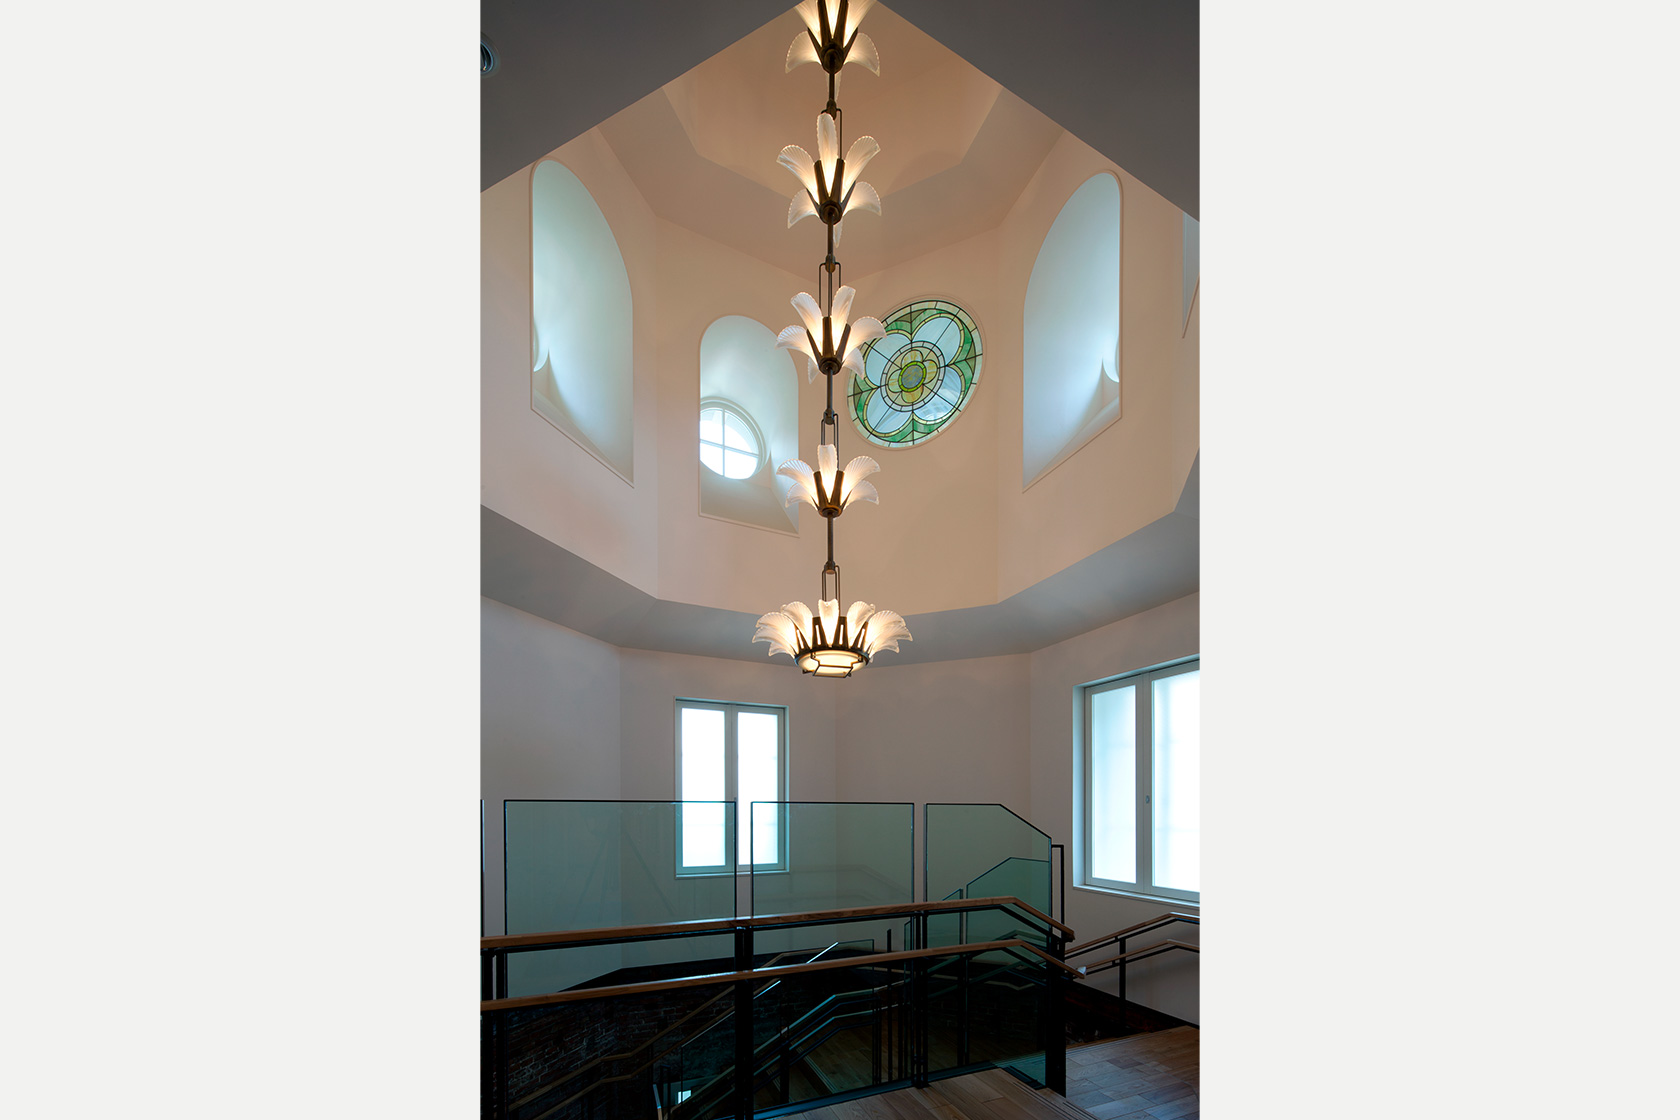 Chandelier and stained-glass replaced from the old museum